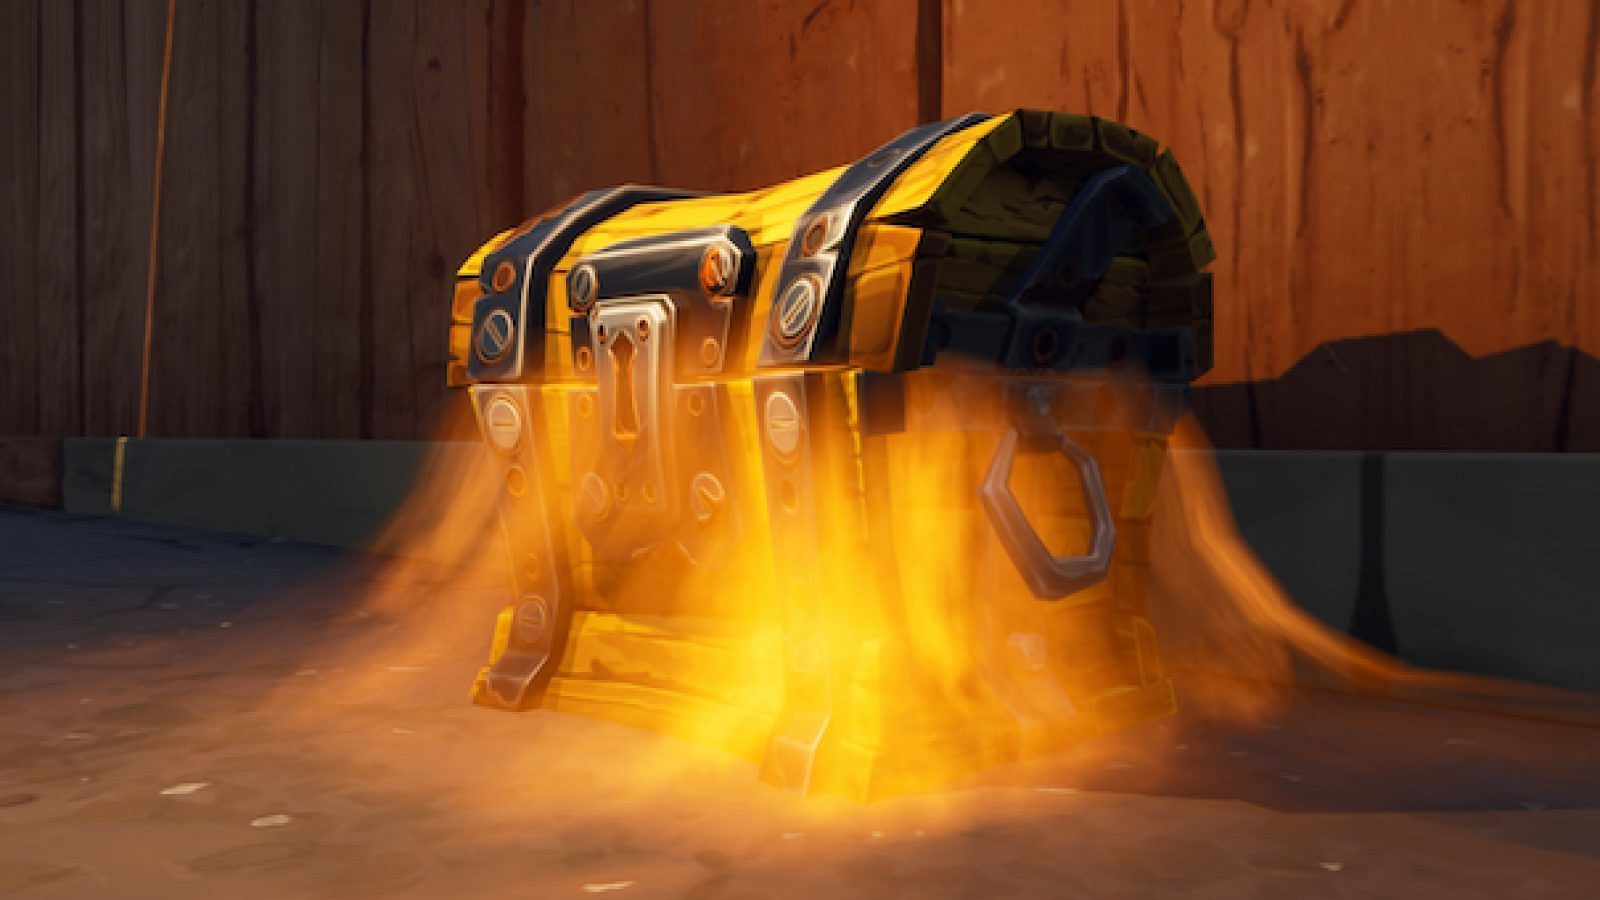 Fortnite chests often contain the best loot (Image via Epic Games)